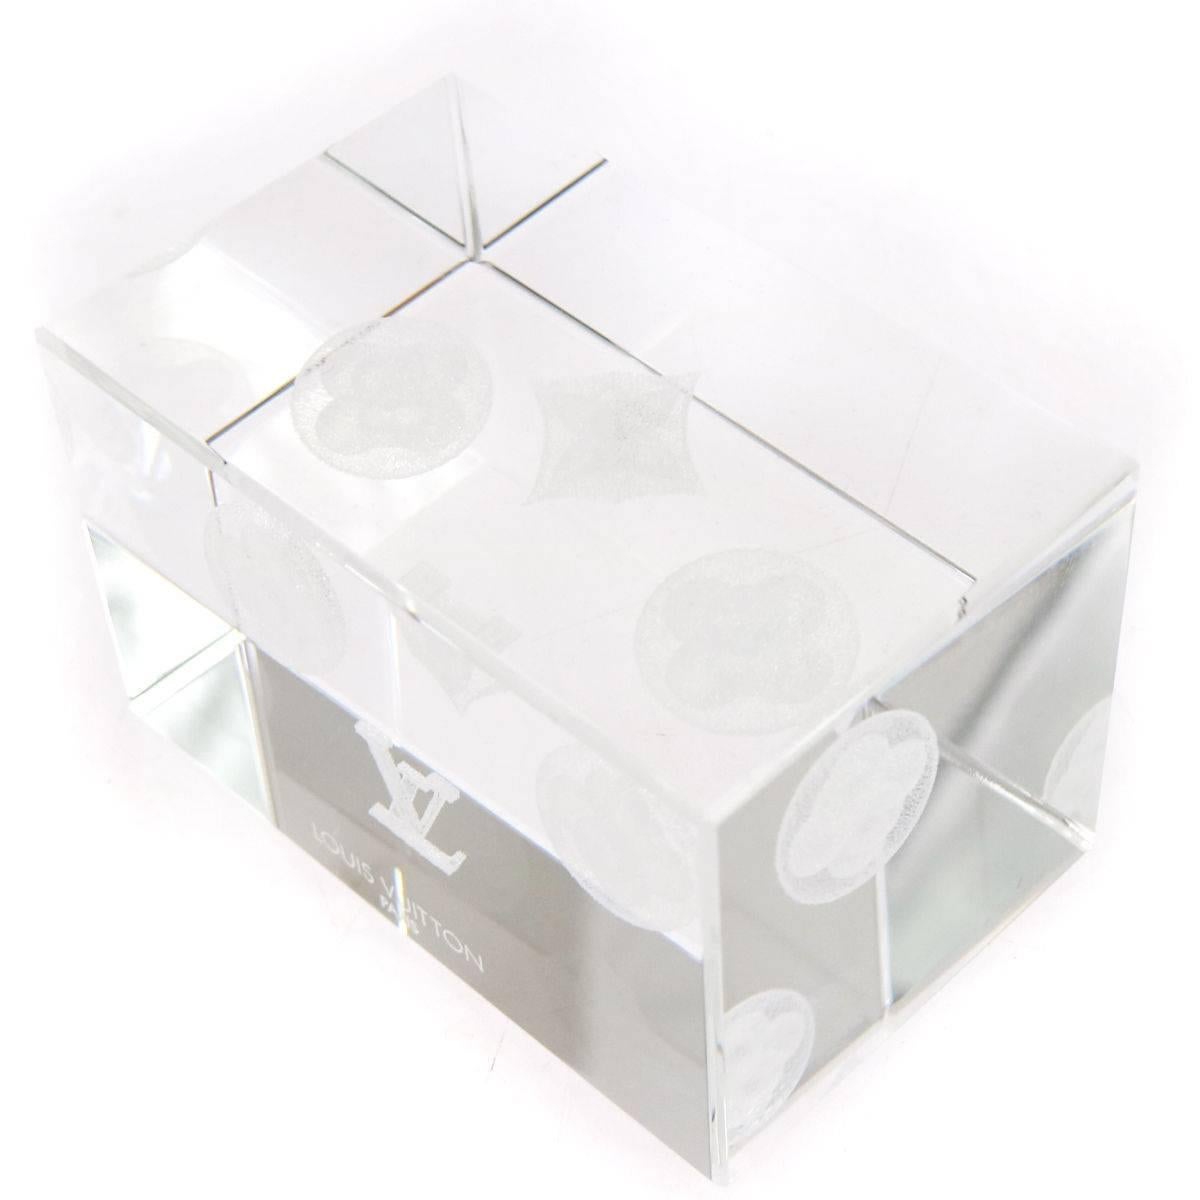 NEW! Louis Vuitton Monogram Crystal Cube Desk Table Paper Weight in Box 1